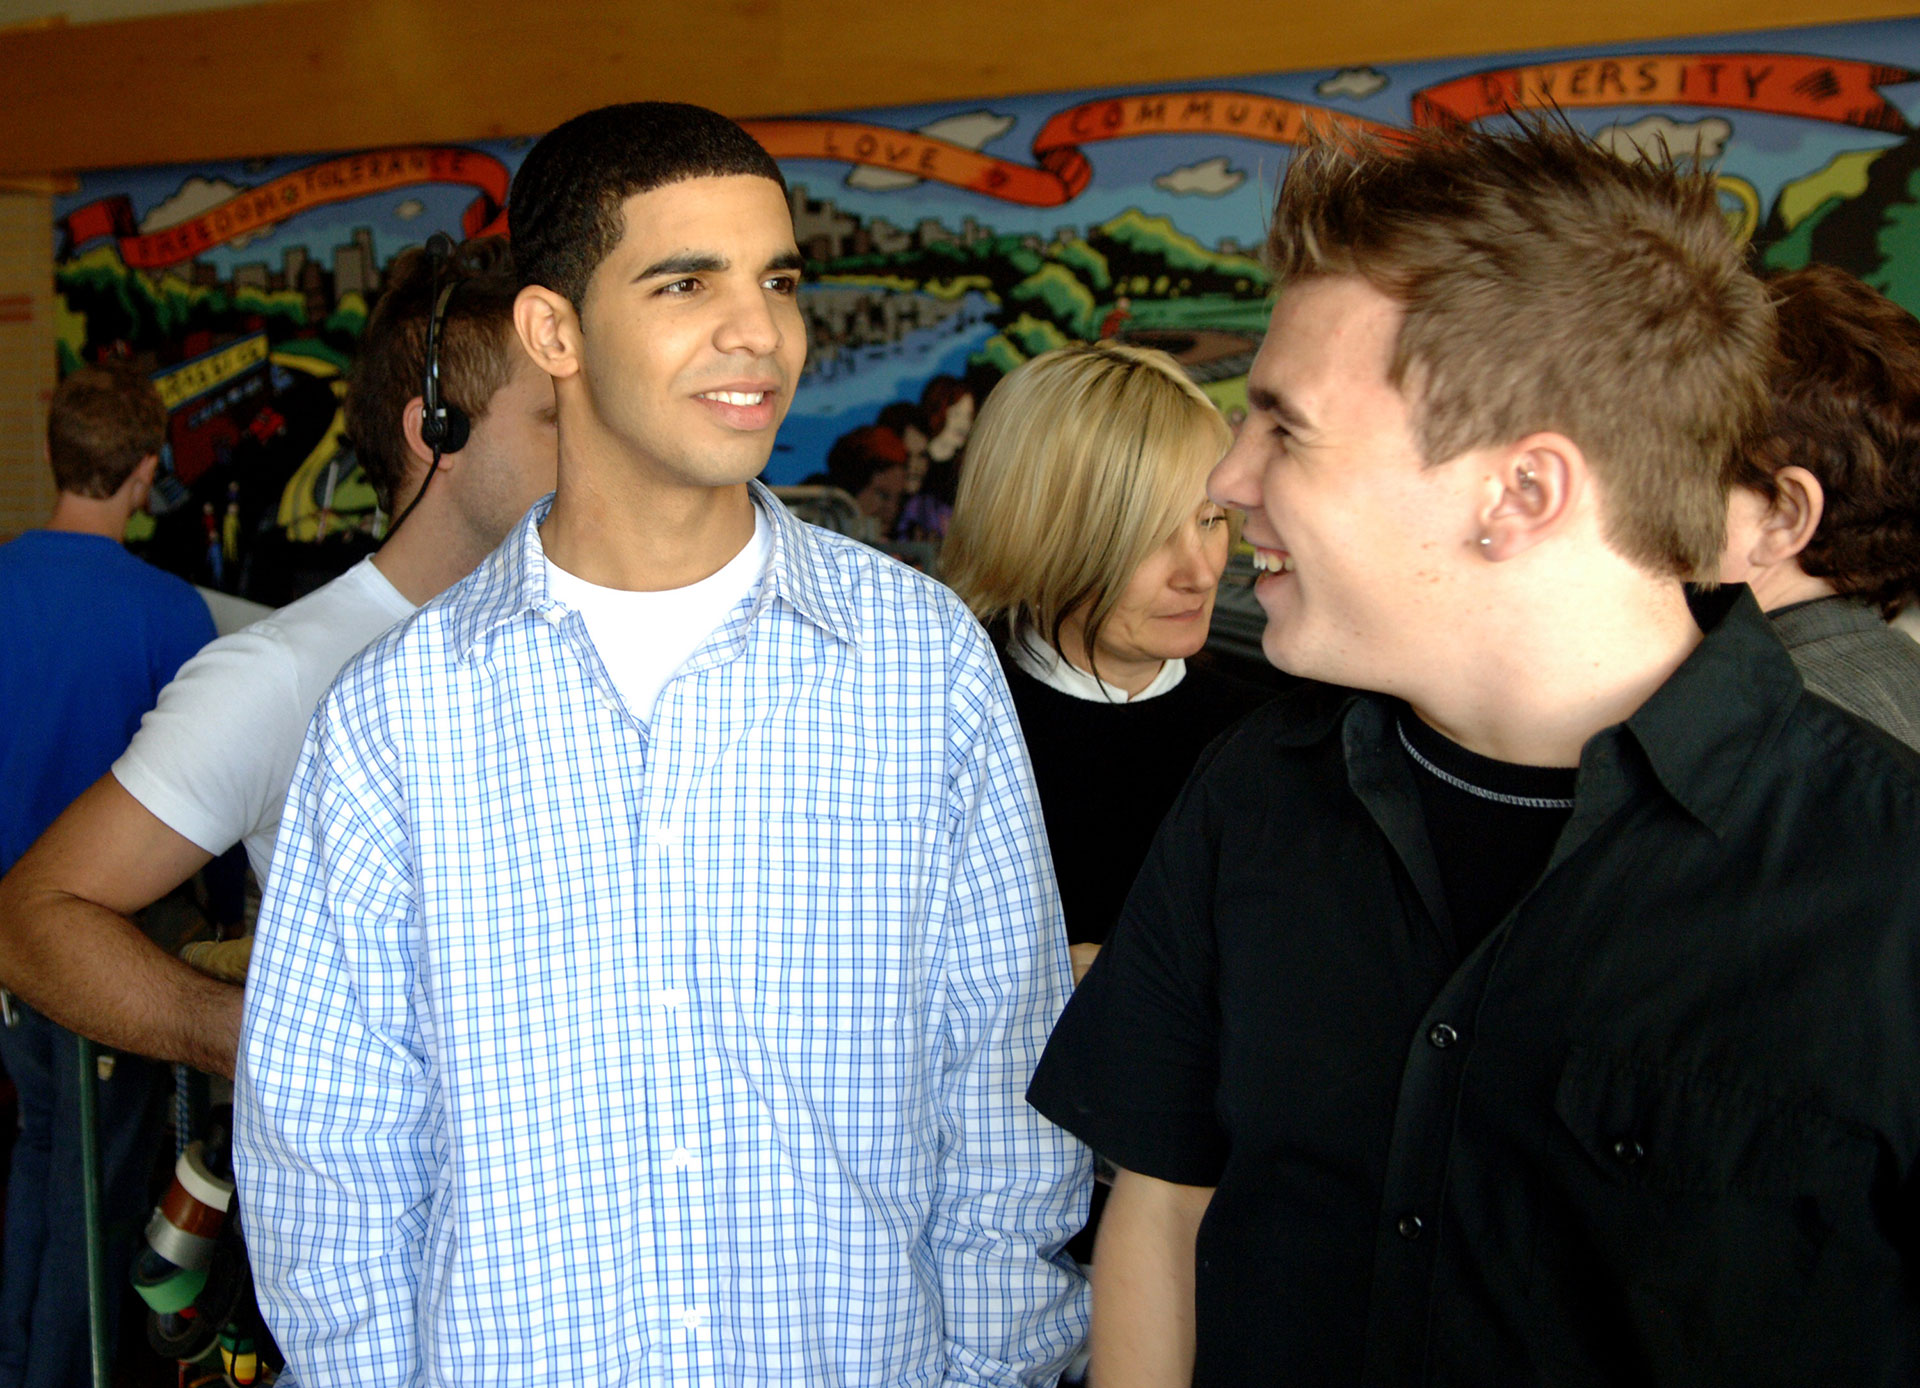 Aubrey Graham (Jimmy) and Shane Kippel (Spinner) during &quot;Degrassi: The Next Generation&quot; Celebrates 100th Episode at Degrassi High School Set in Toronto, Ontario, Canada.